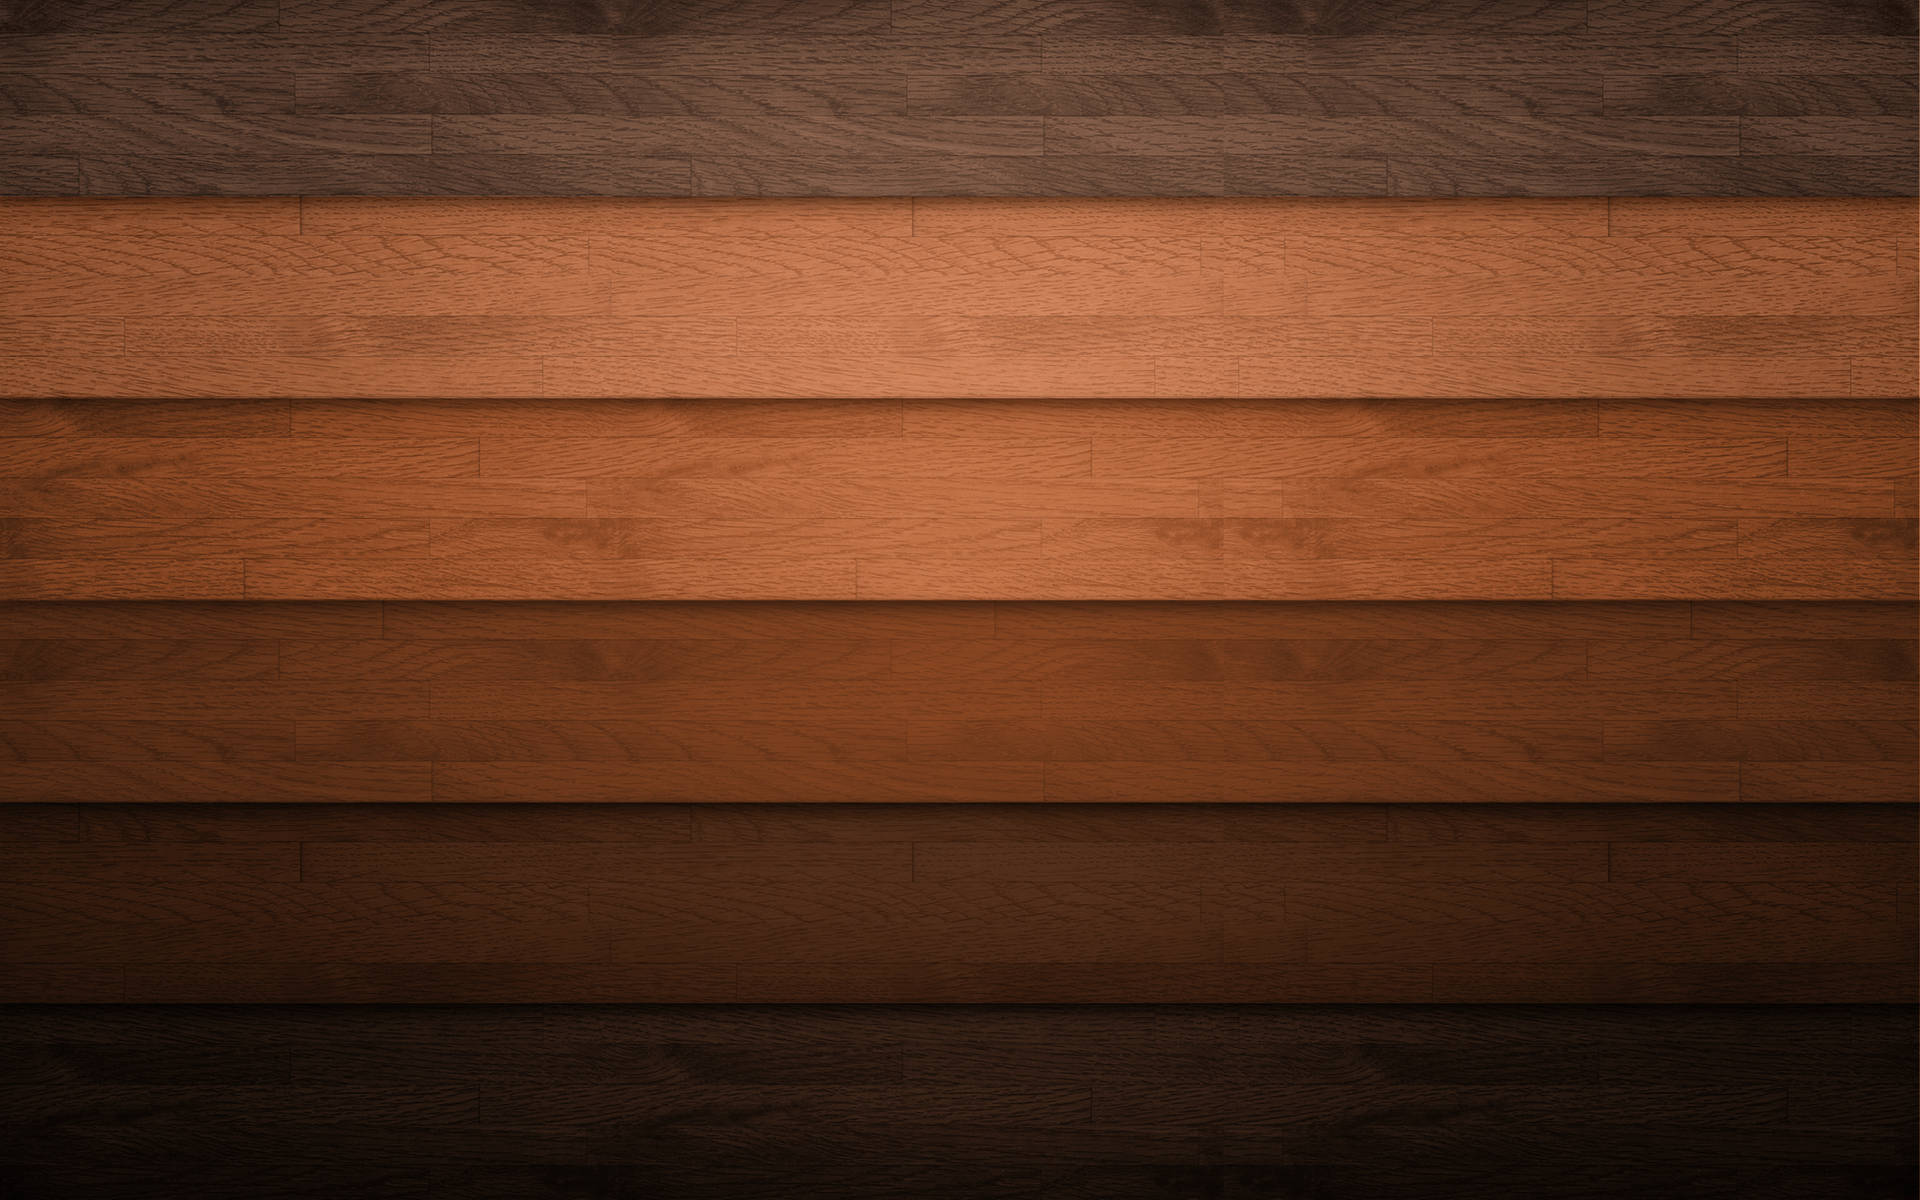 2560X1600 Brown Wallpaper and Background